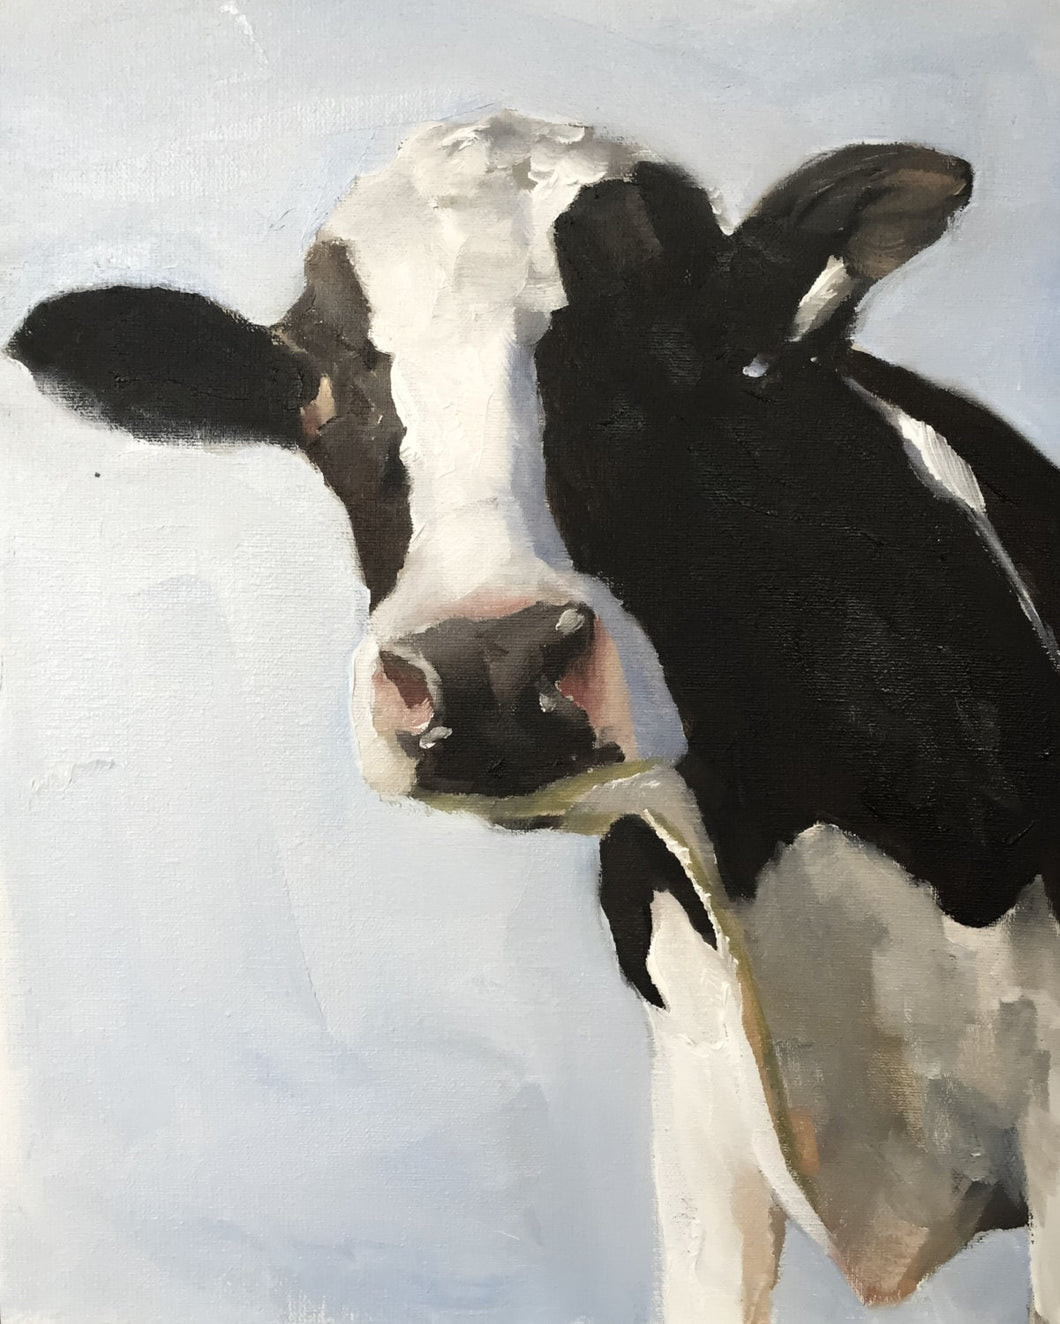 Cow Painting - Cowl art - Cow Print - Fine Art - from original oil painting by James Coates